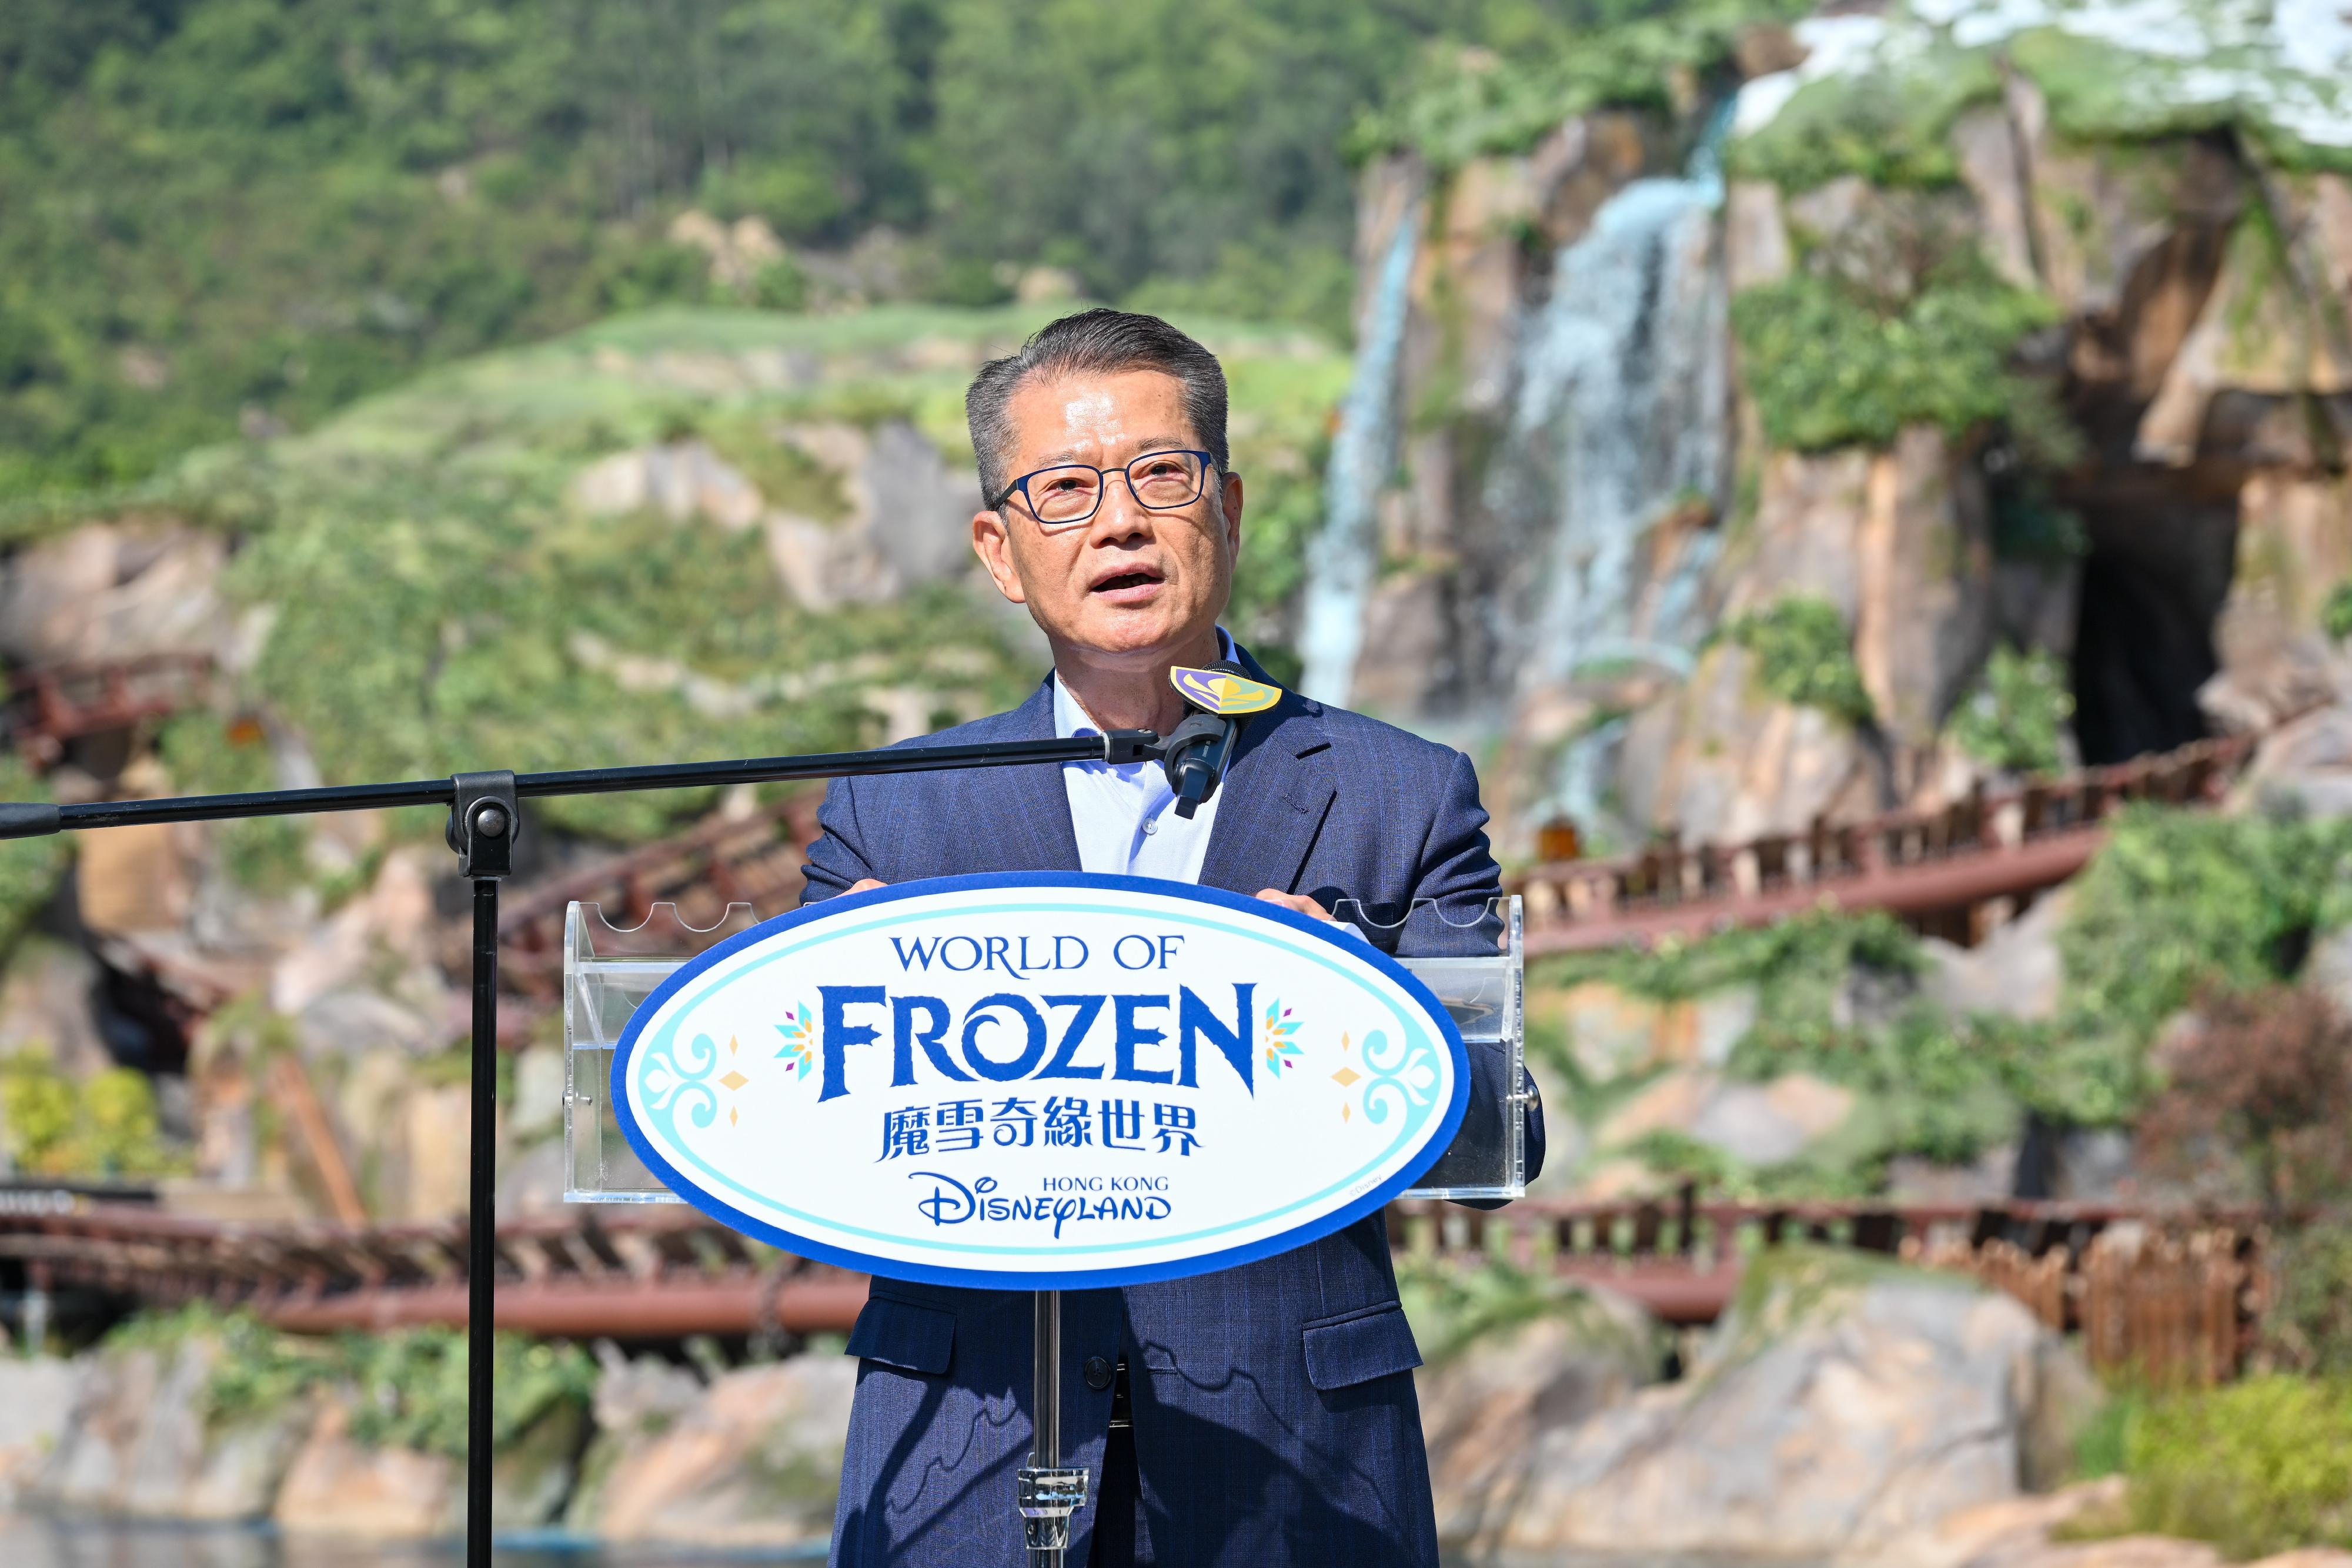 The Financial Secretary, Mr Paul Chan, speaks at the Hong Kong Disneyland Resort "A Welcome Ceremony for World of Frozen" today (November 20).